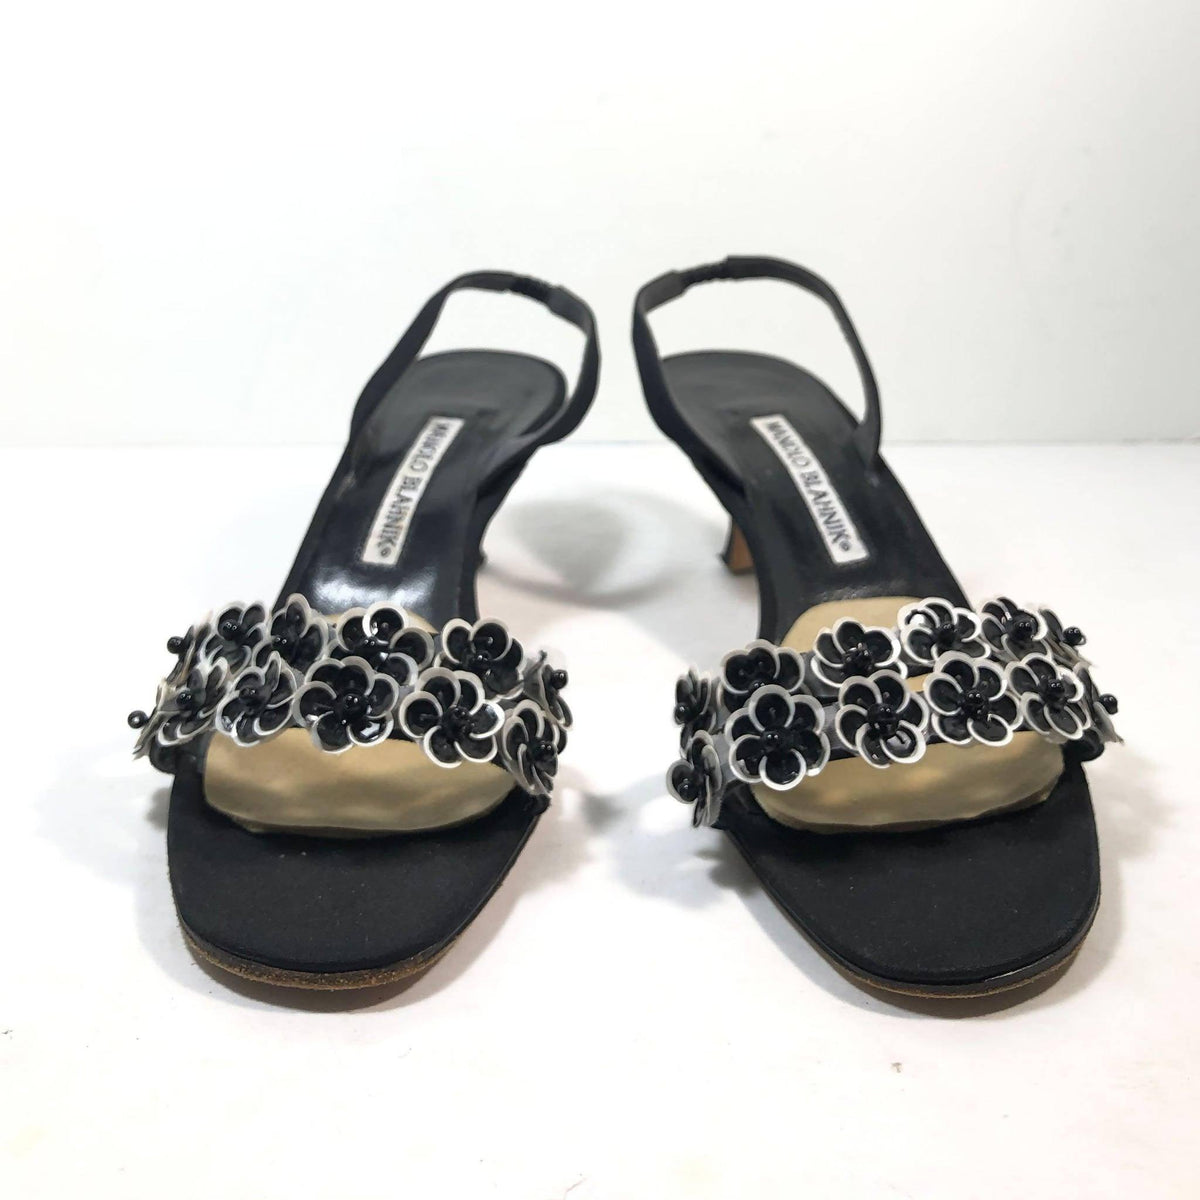 Pre-owned MANOLO BLAHNIK Black & White Slingback Heels with Floral Toe Strap | US 8 1/2 - EU 38 1/2 - theREMODA